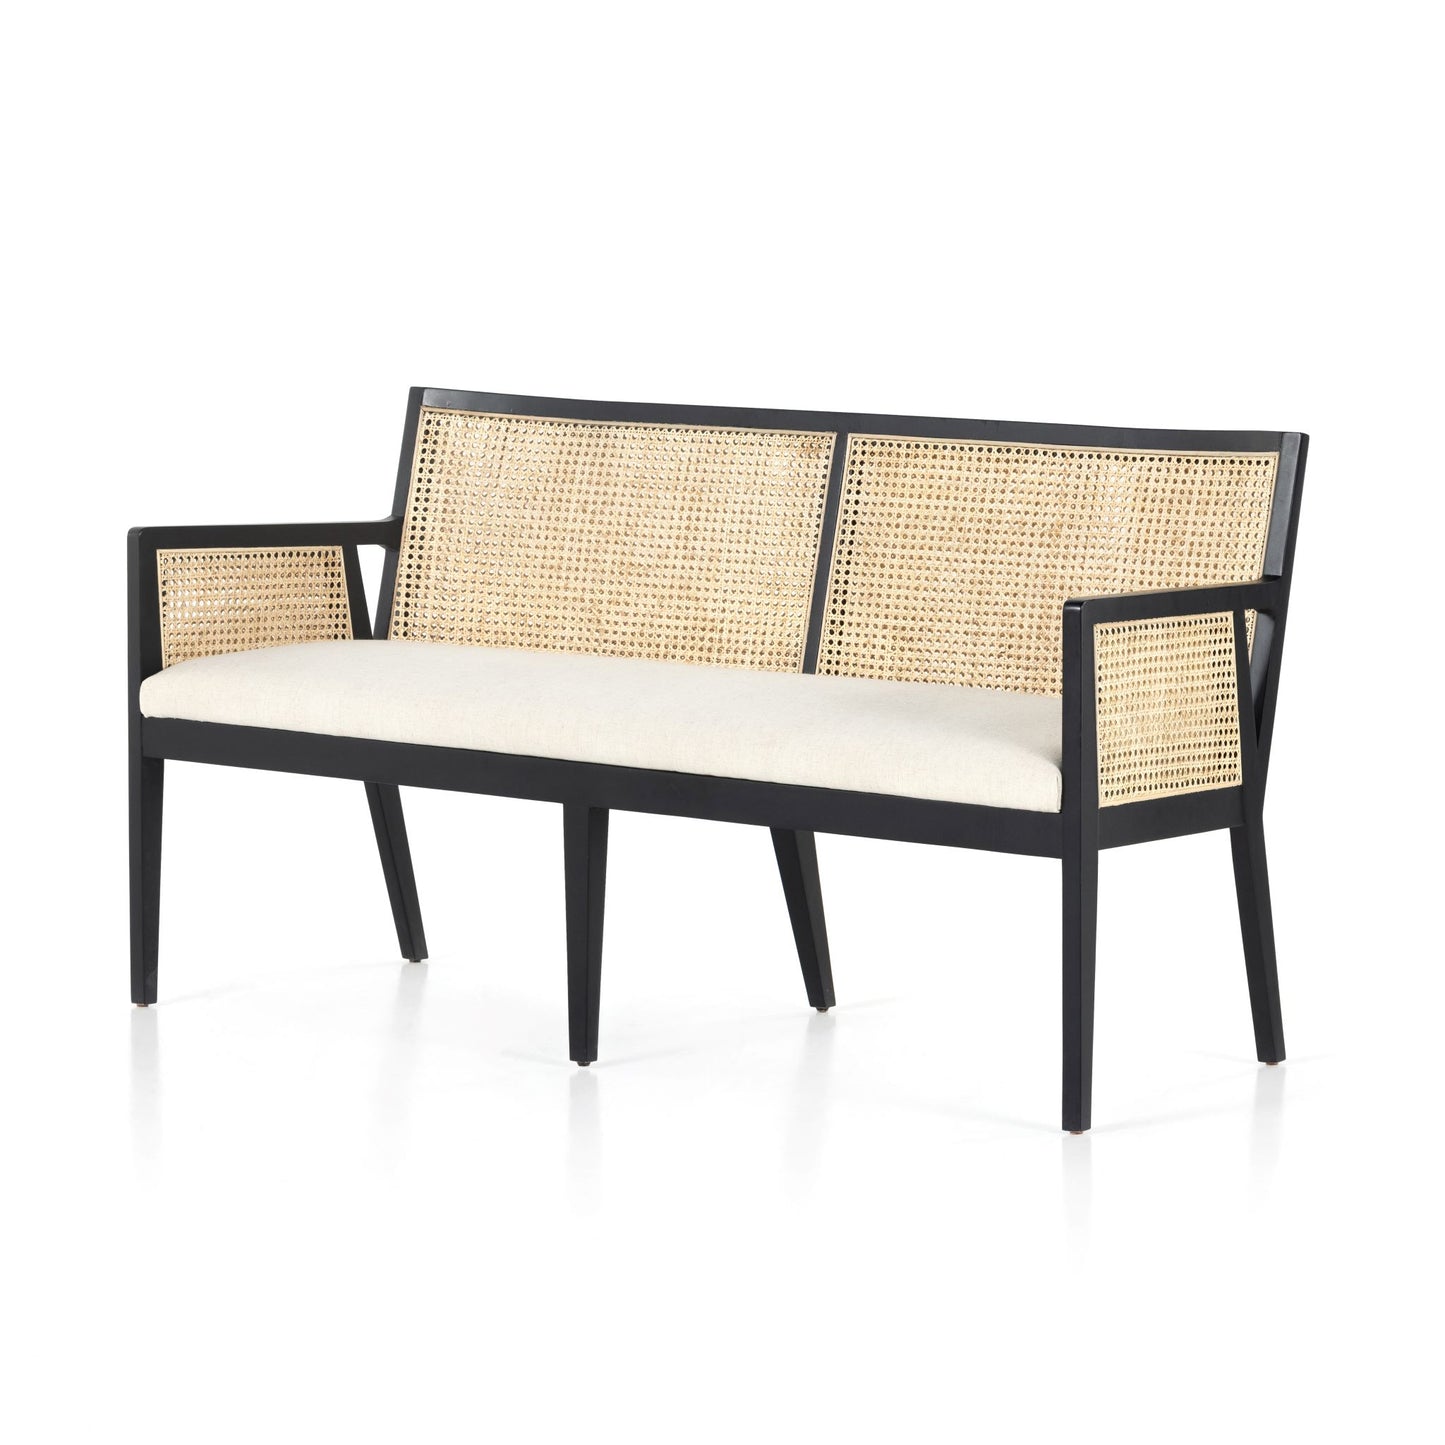 Load image into Gallery viewer, Antonia Cane Dining Bench Brushed EbonyDining Benches Four Hands  Brushed Ebony   Four Hands, Burke Decor, Mid Century Modern Furniture, Old Bones Furniture Company, Old Bones Co, Modern Mid Century, Designer Furniture, https://www.oldbonesco.com/
